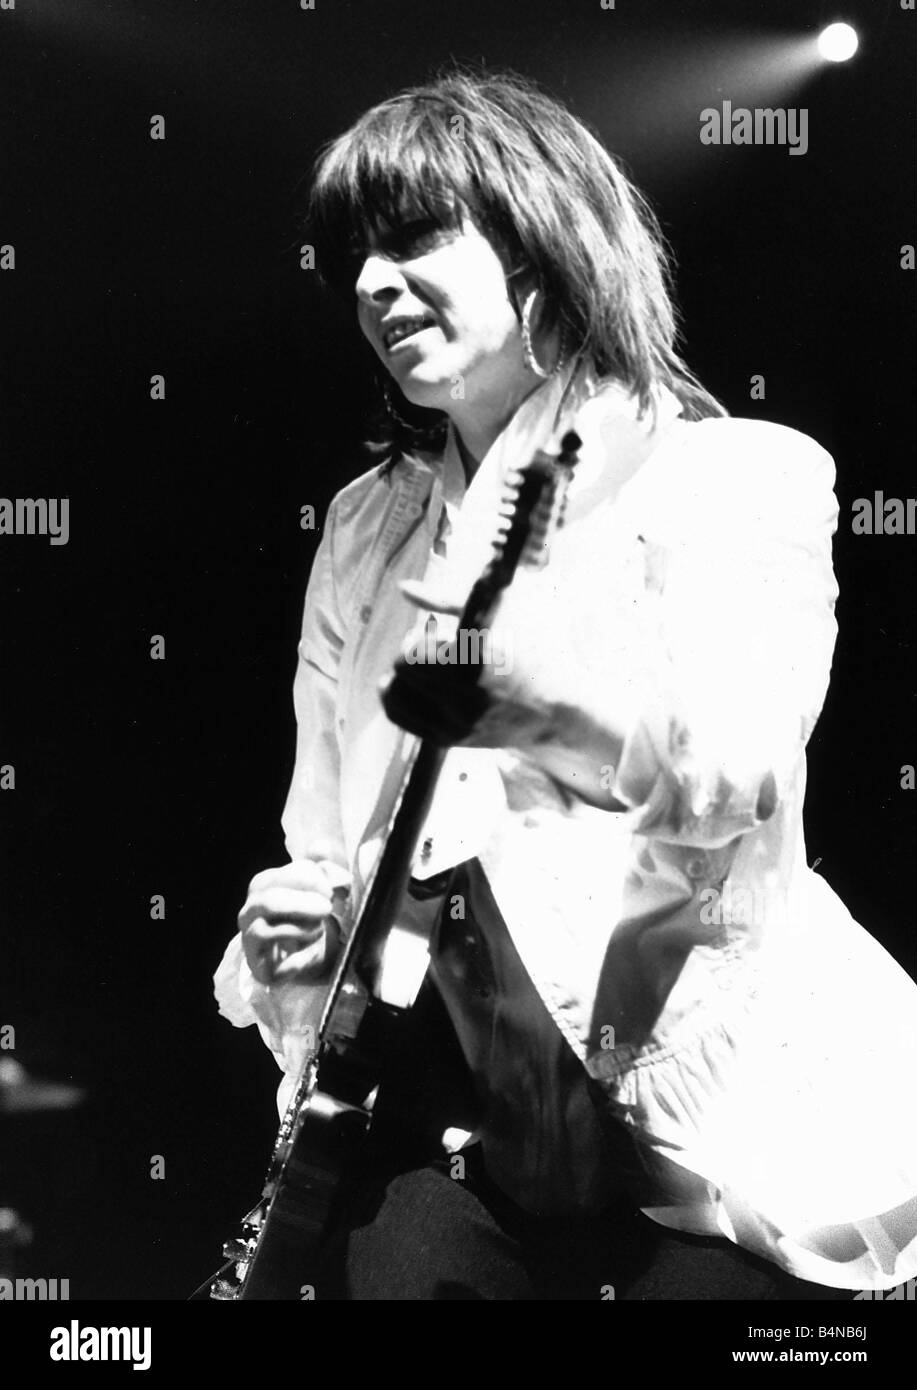 Chrissie Hynde singer with The Pretenders pop group 1987 playing guitar in concert at Wembley Arena Stock Photo